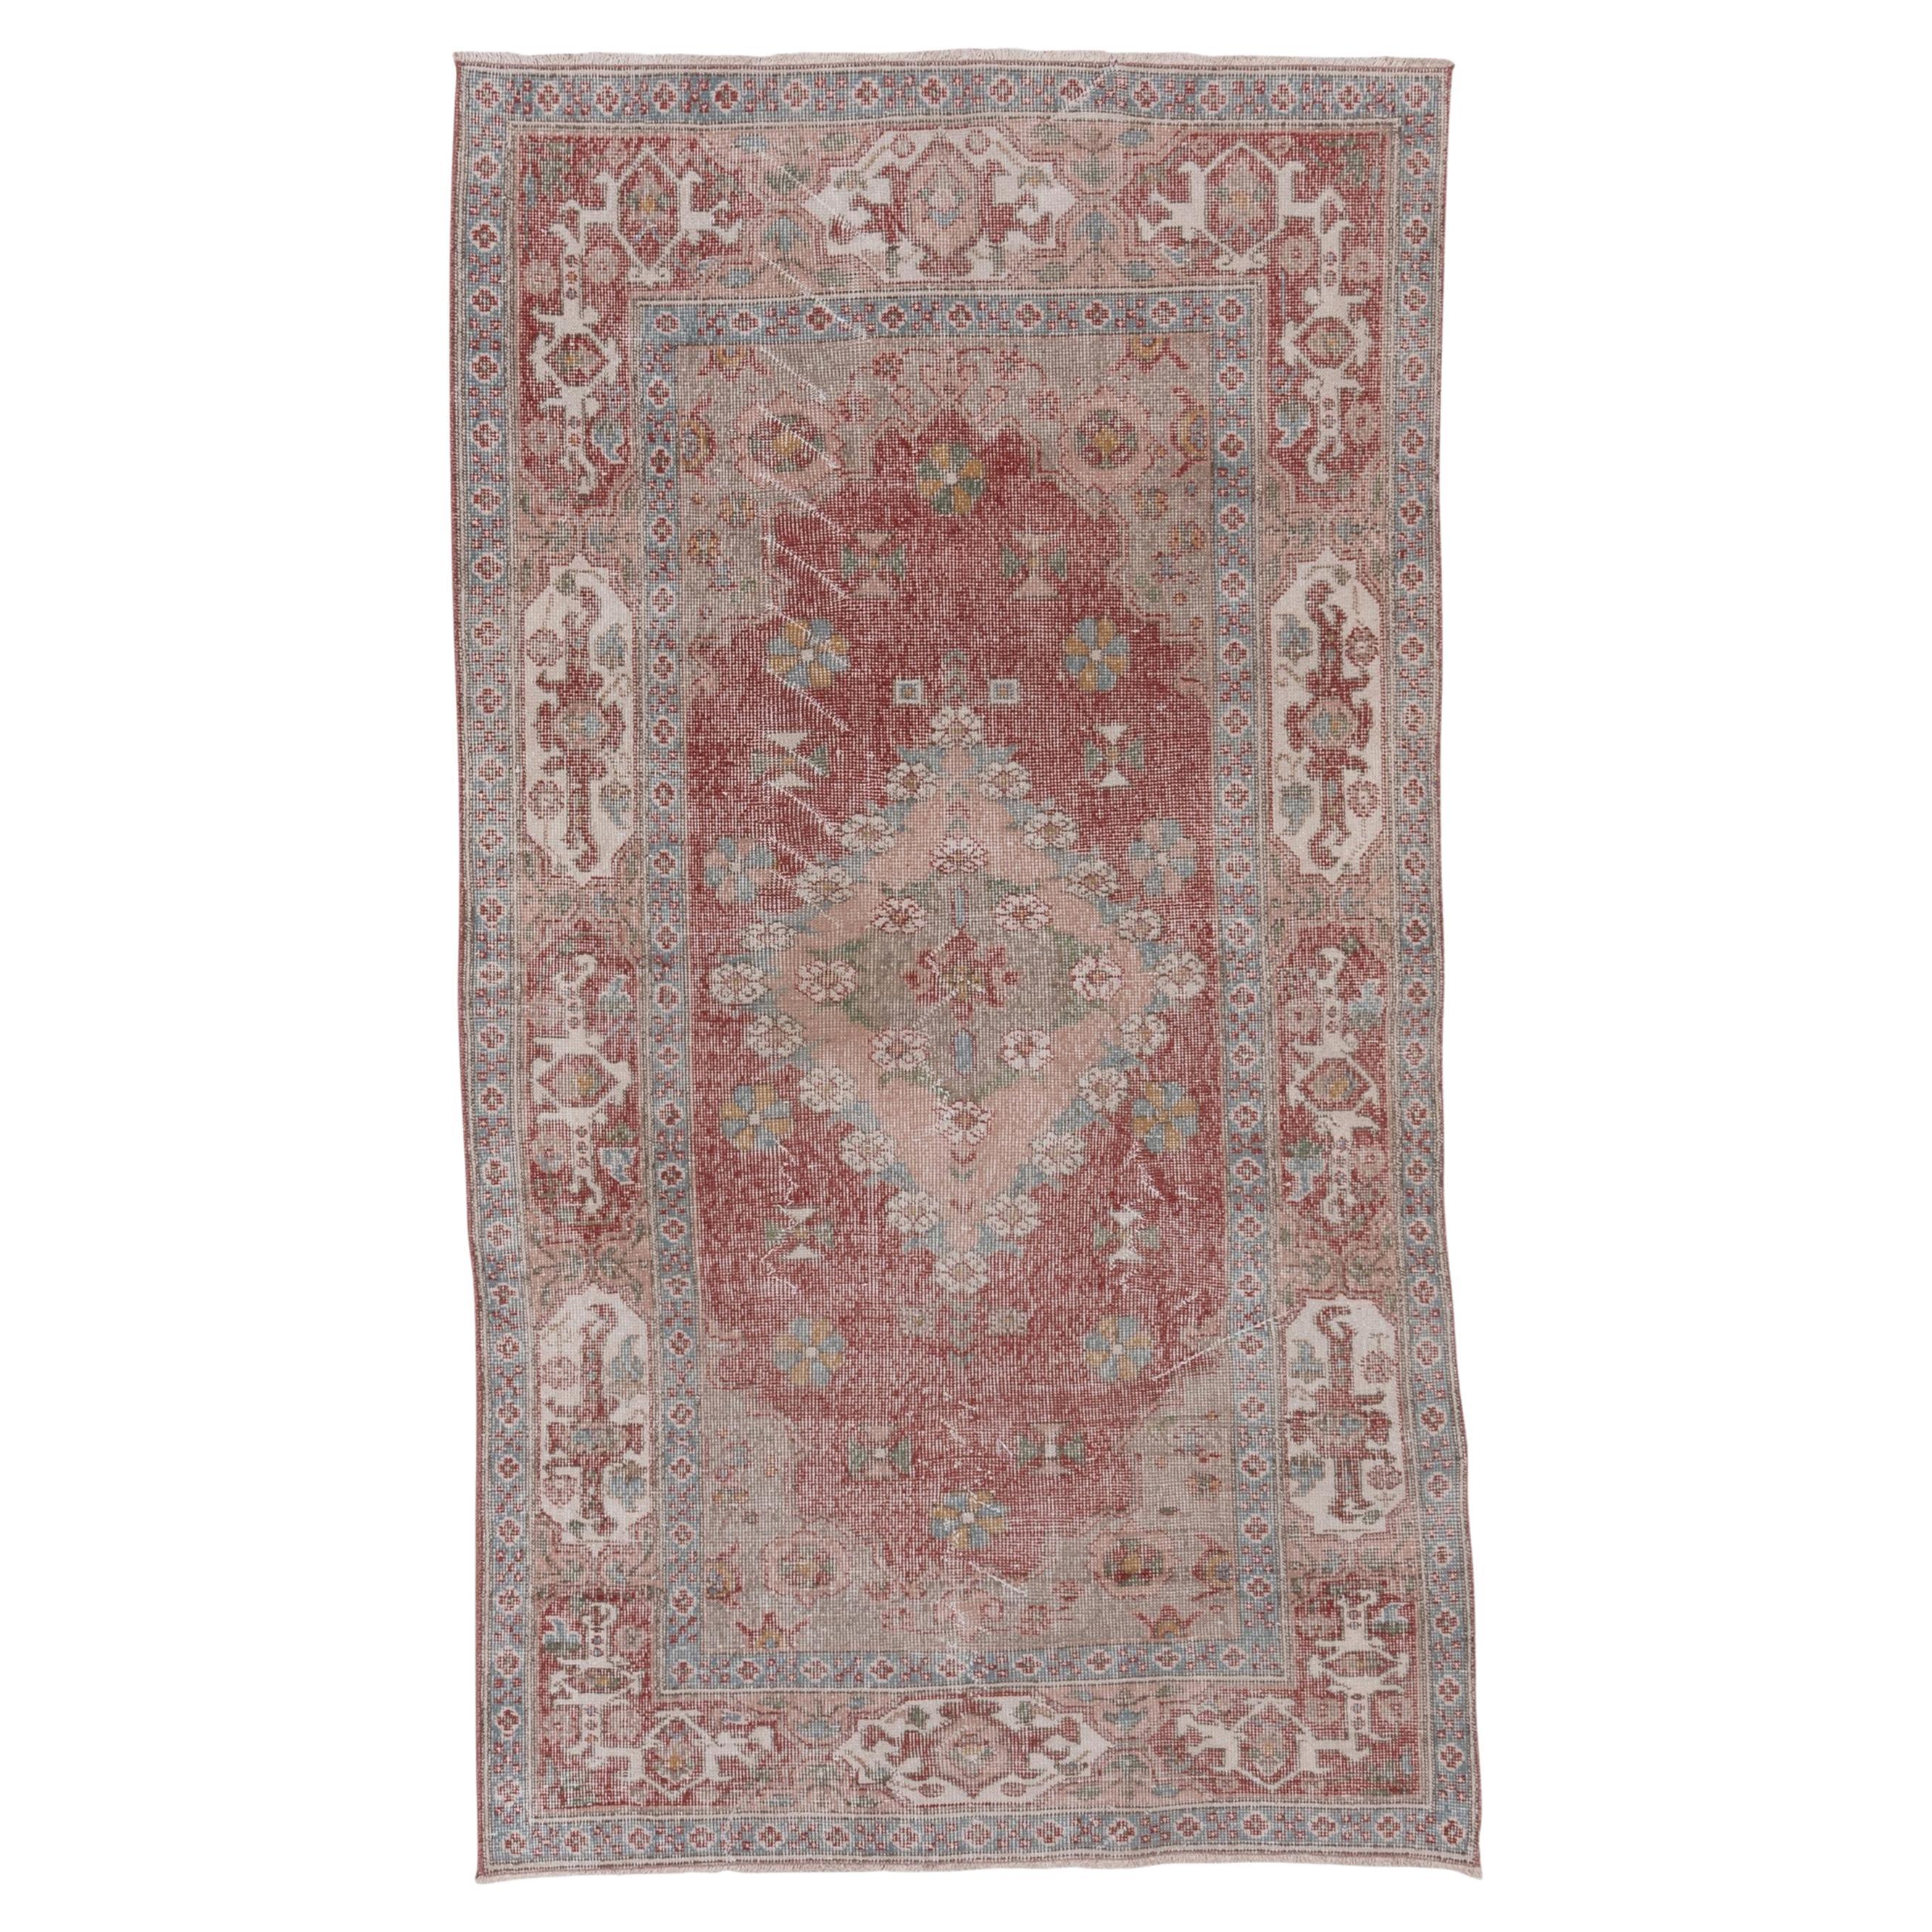 Lightly Distressed Oushak Rug, Soft Red Field, Baby Blue Borders, Shabby Chic